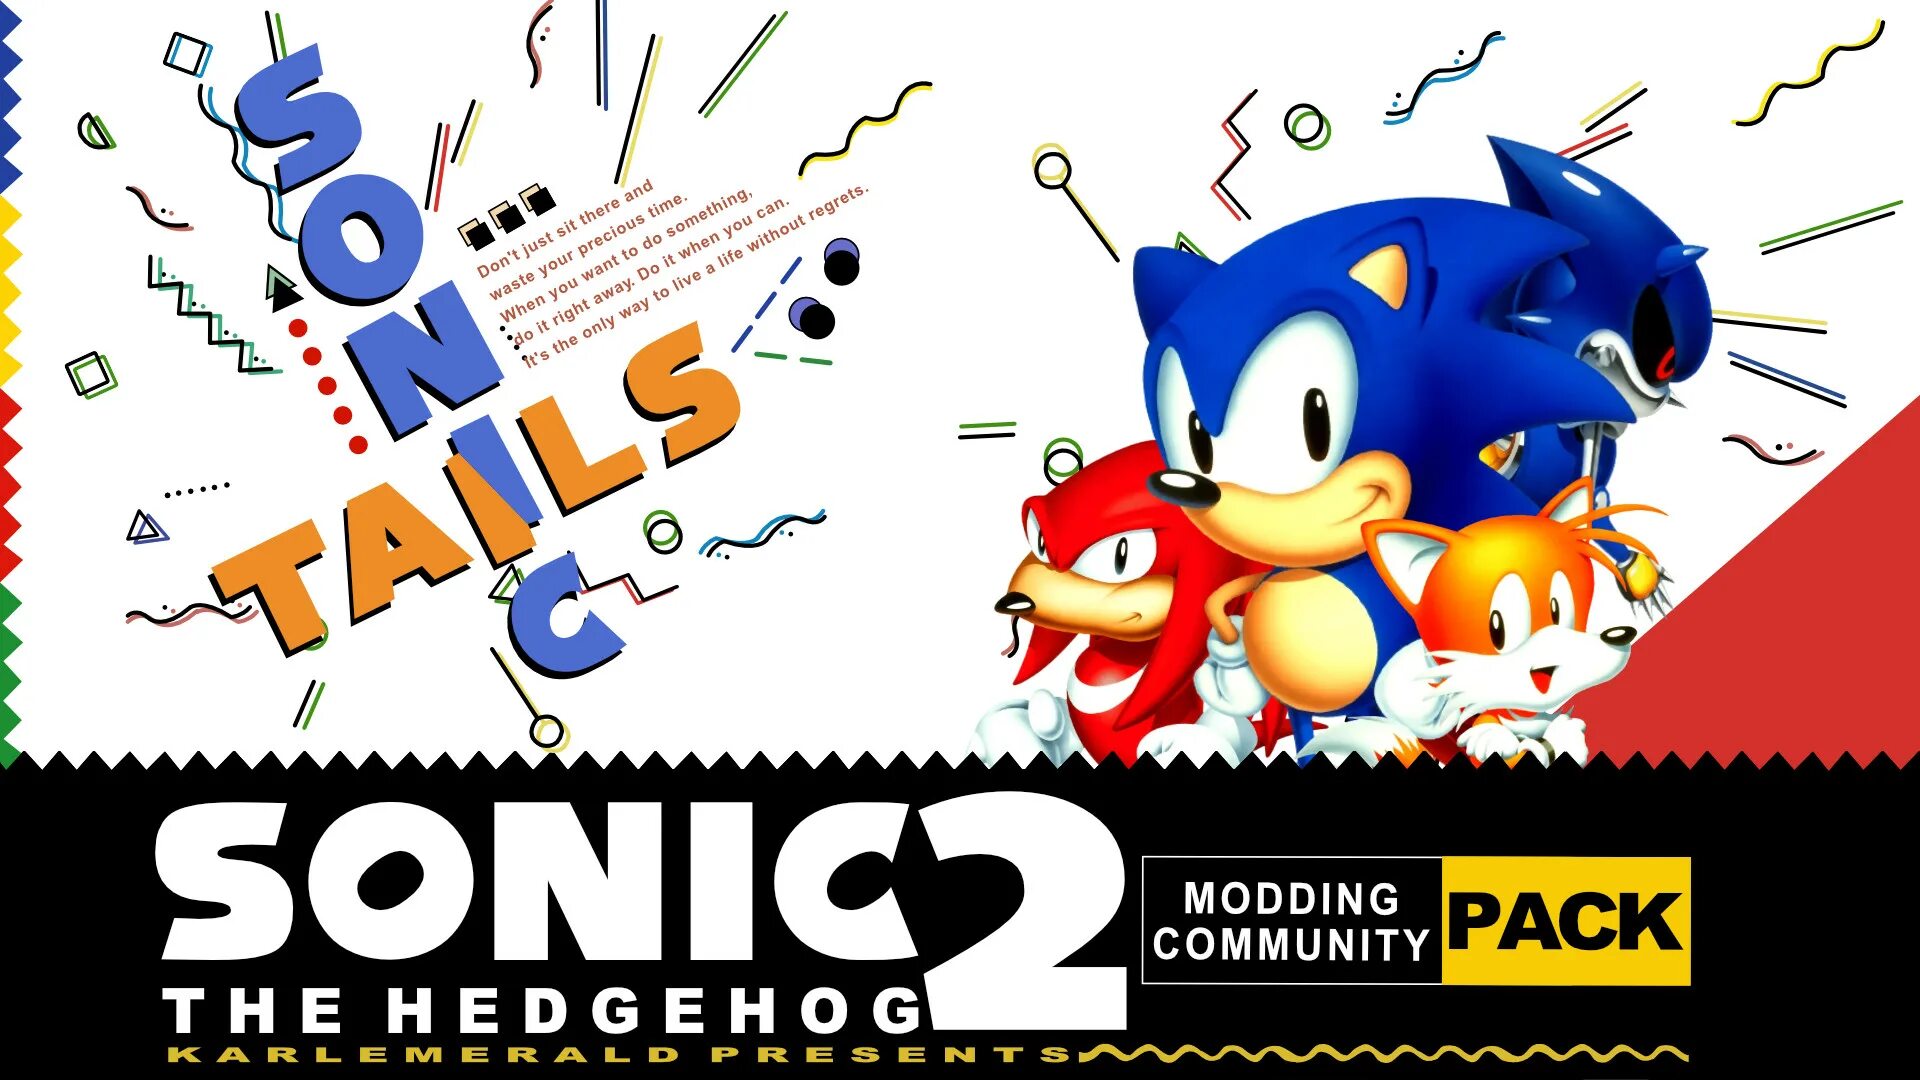 Sonic 2 absolute. Sonic 2 absolute org. Sonic 2 absolute Mod Mighty. Sonic absolute mods